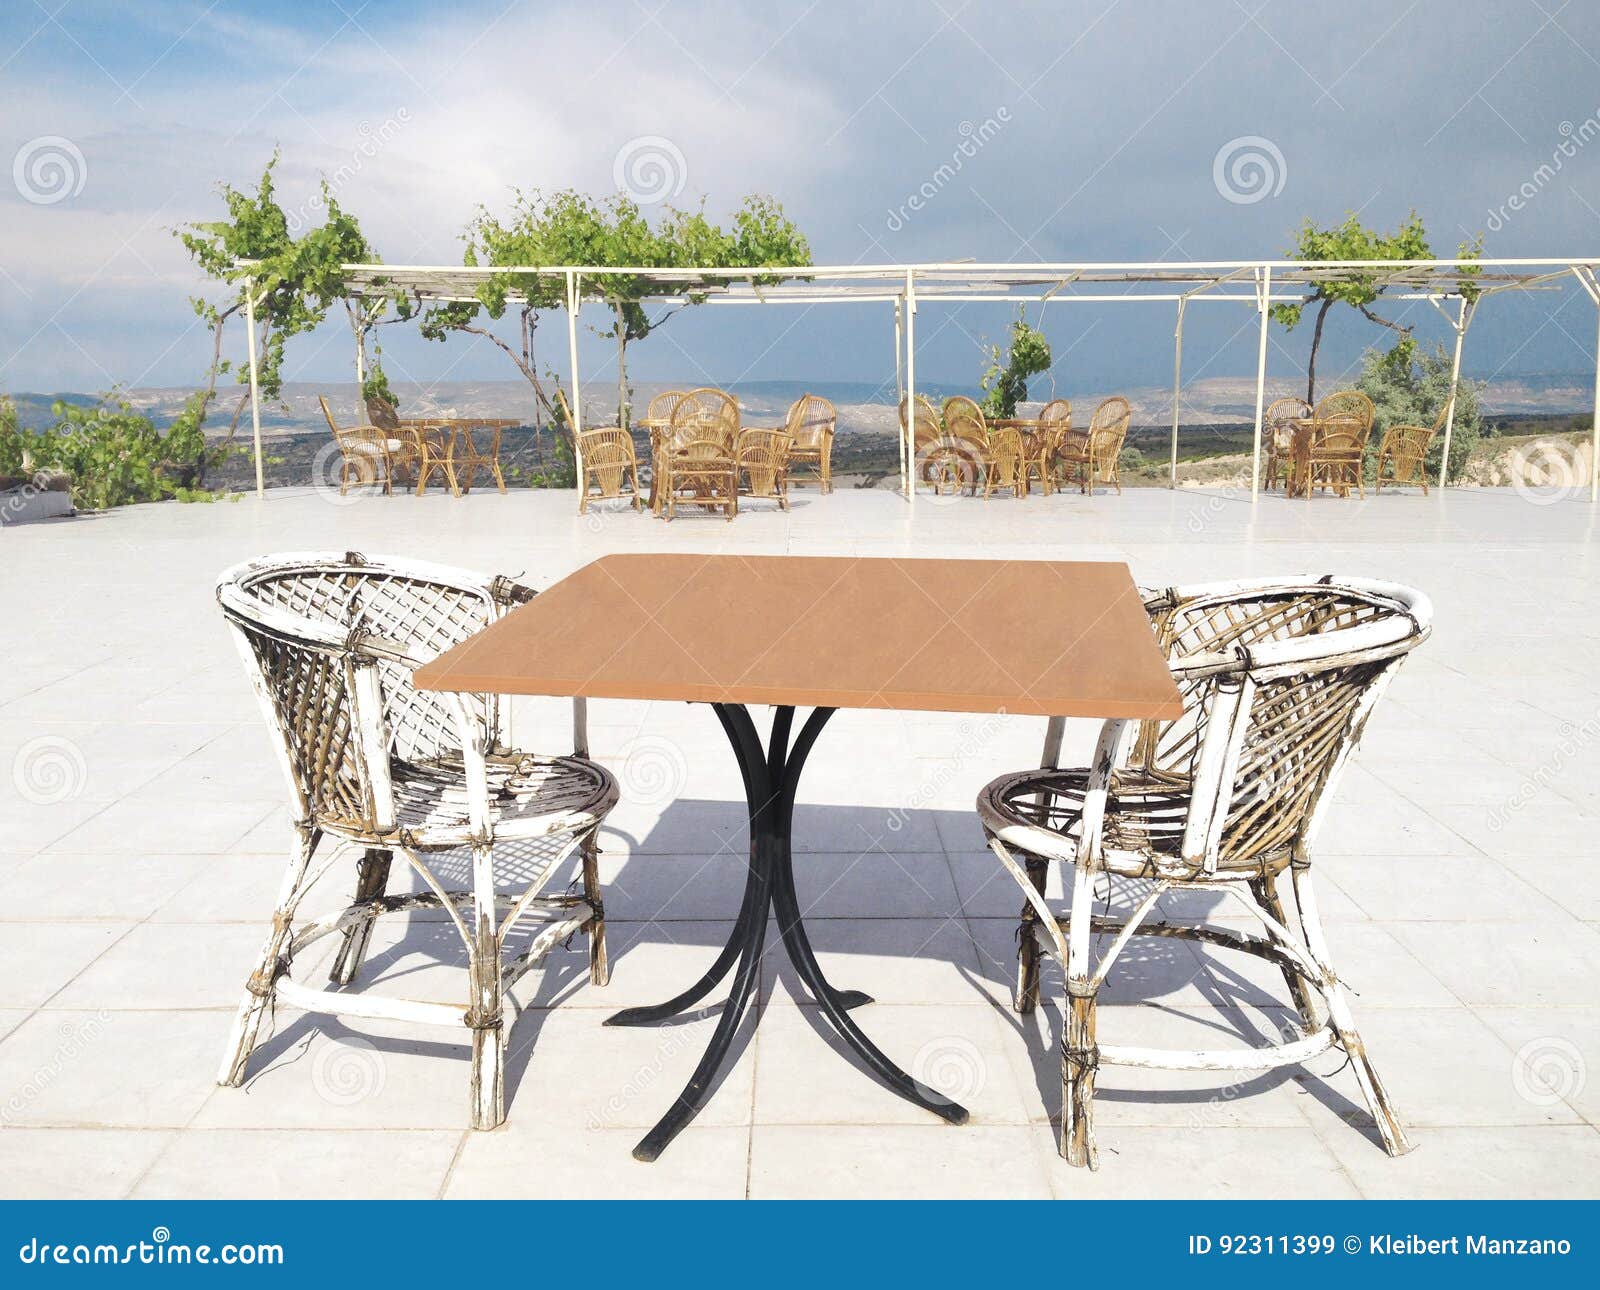 table and two chairs